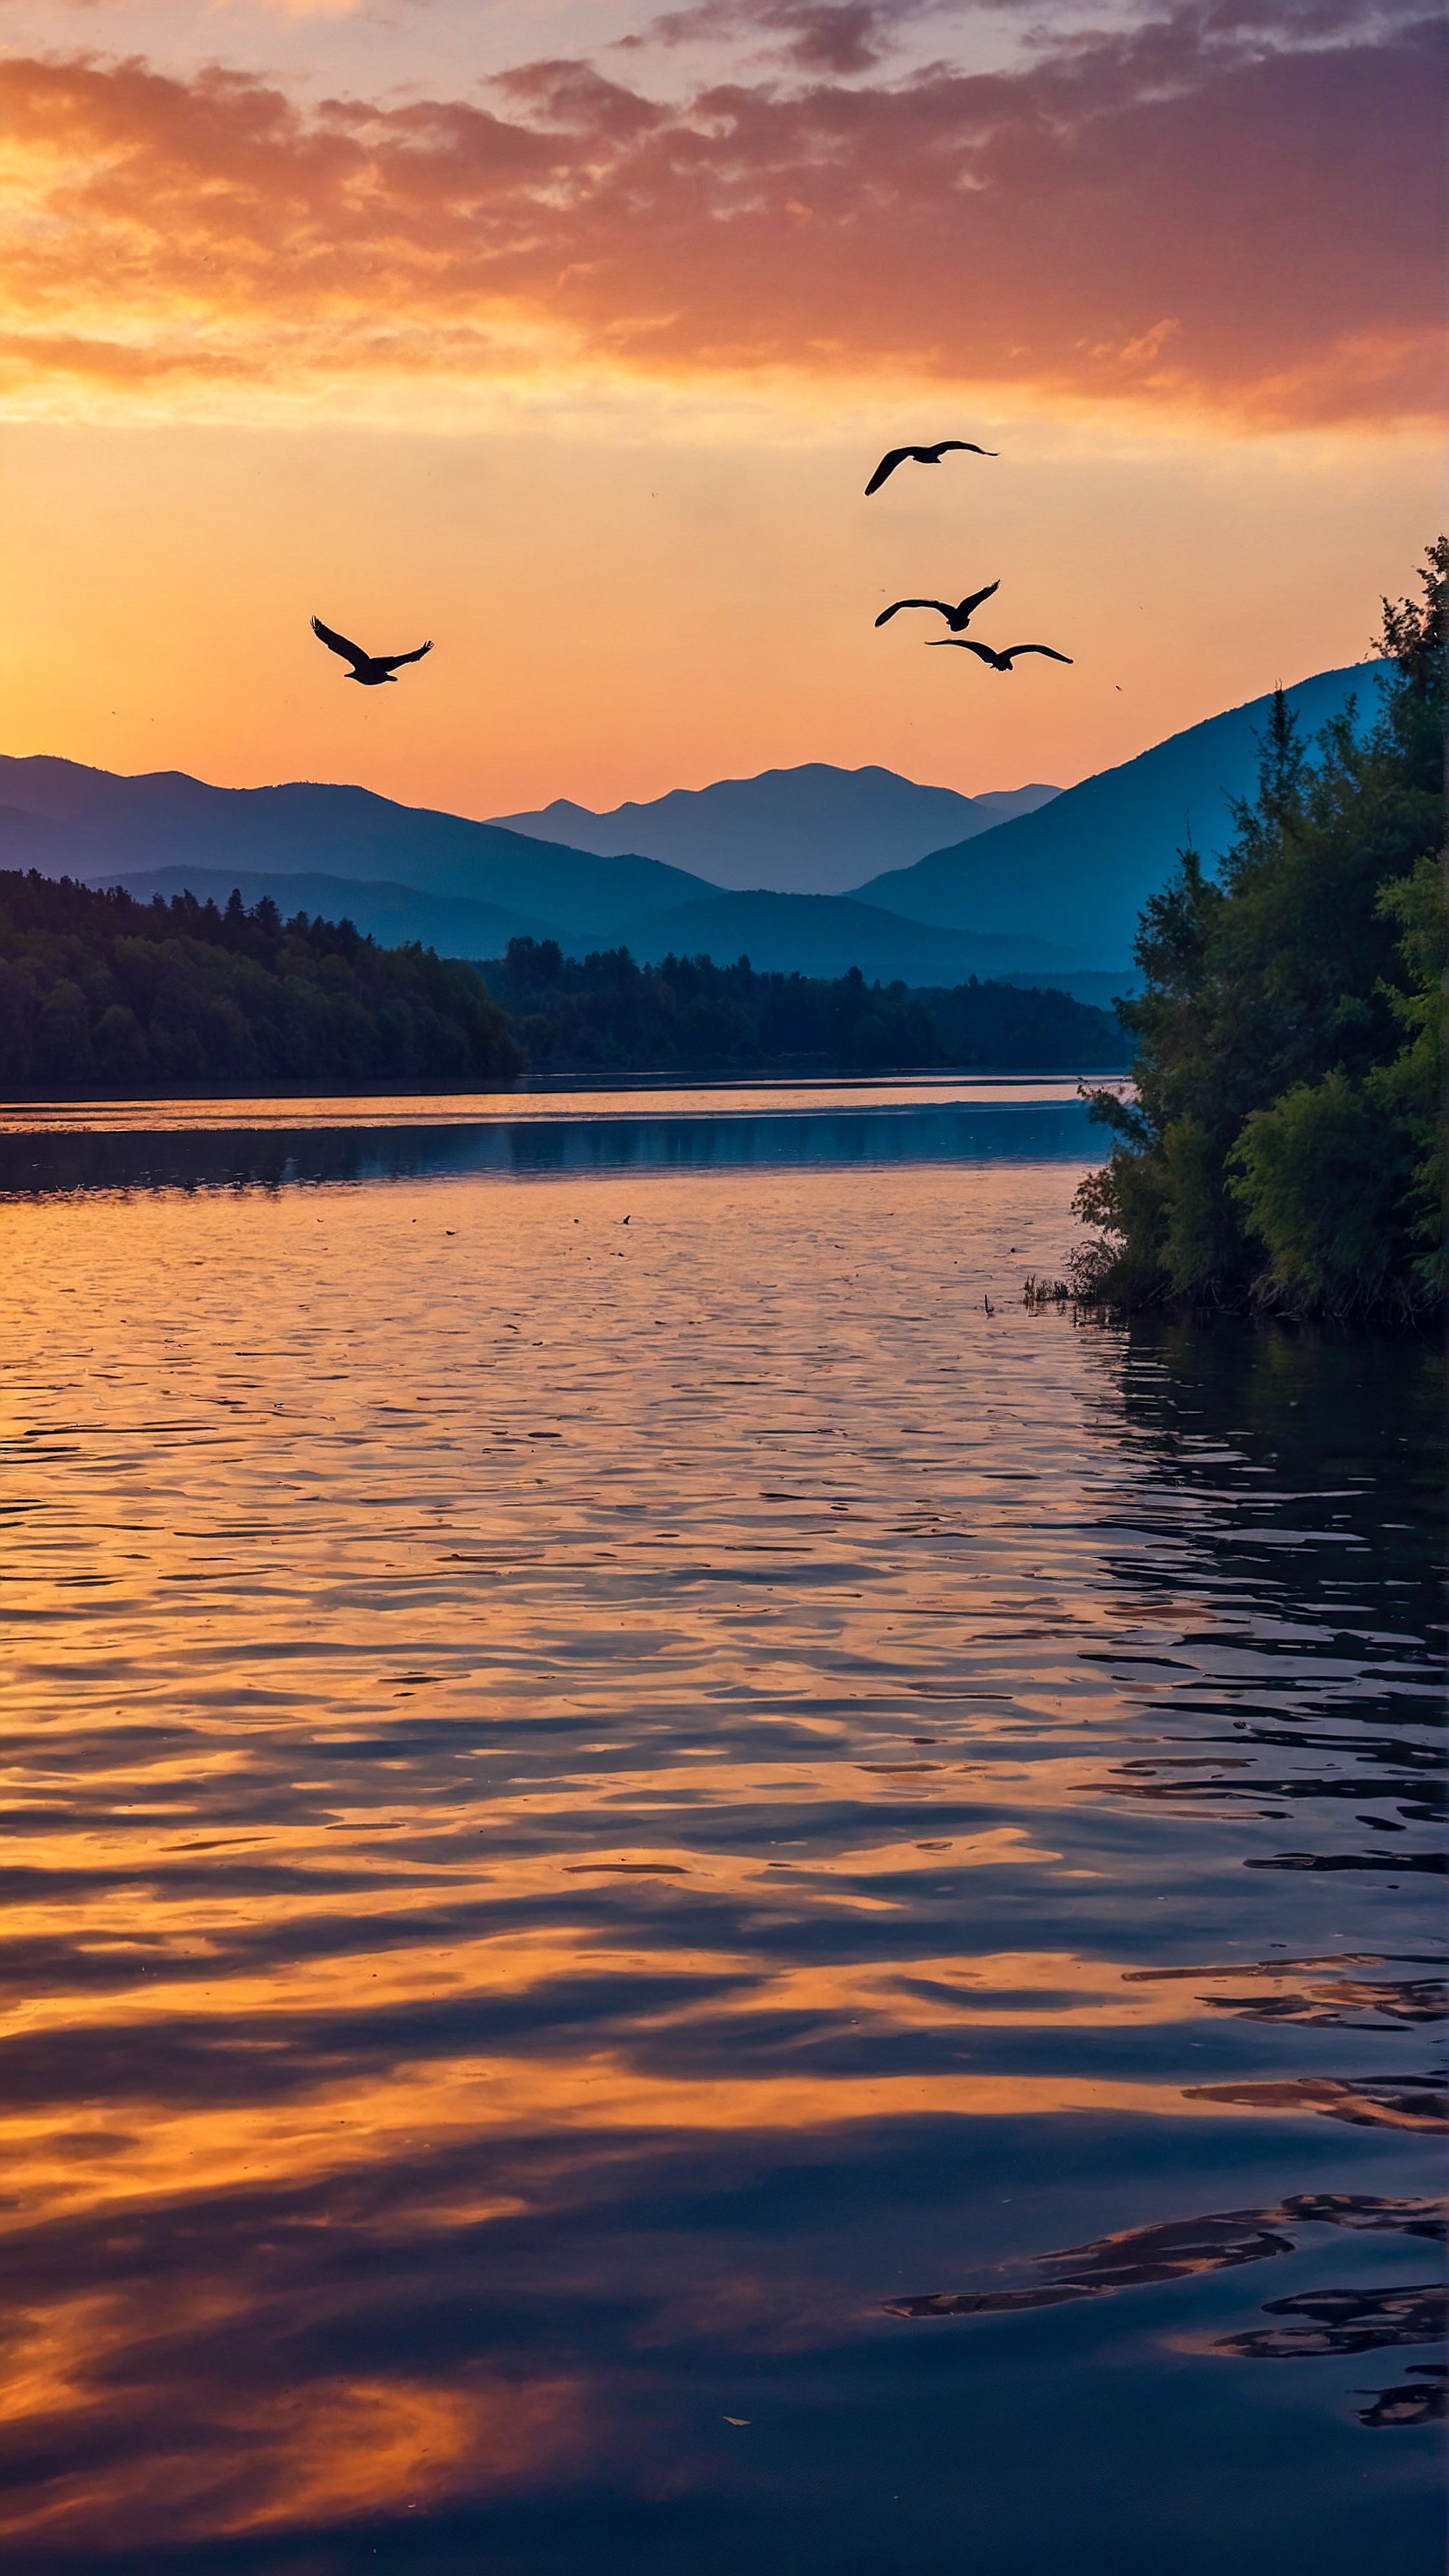 Get a taste of serenity with our best iPhone backgrounds, depicting a tranquil and picturesque sunset scene with silhouetted trees, a calm lake, distant mountains, and a vibrant sky filled with flying birds.